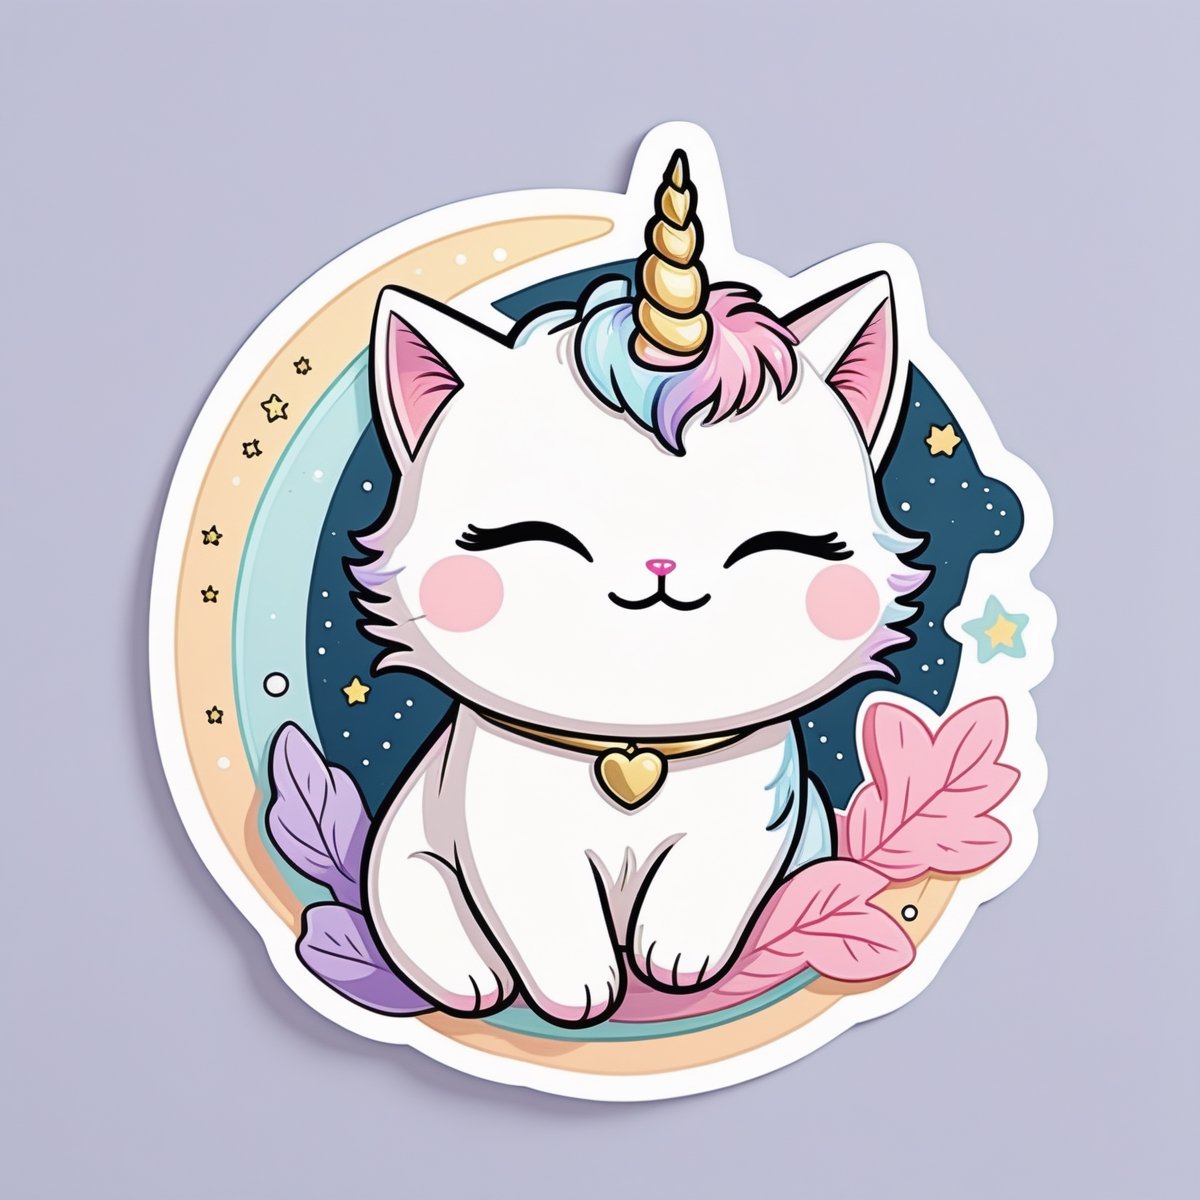 stickers, cute illustration of a unicorn cat, colorful_shapes, kawaii, no bg, pastel colors, delimited lines for cutting,sticker, cute cat sleepling on the moon
